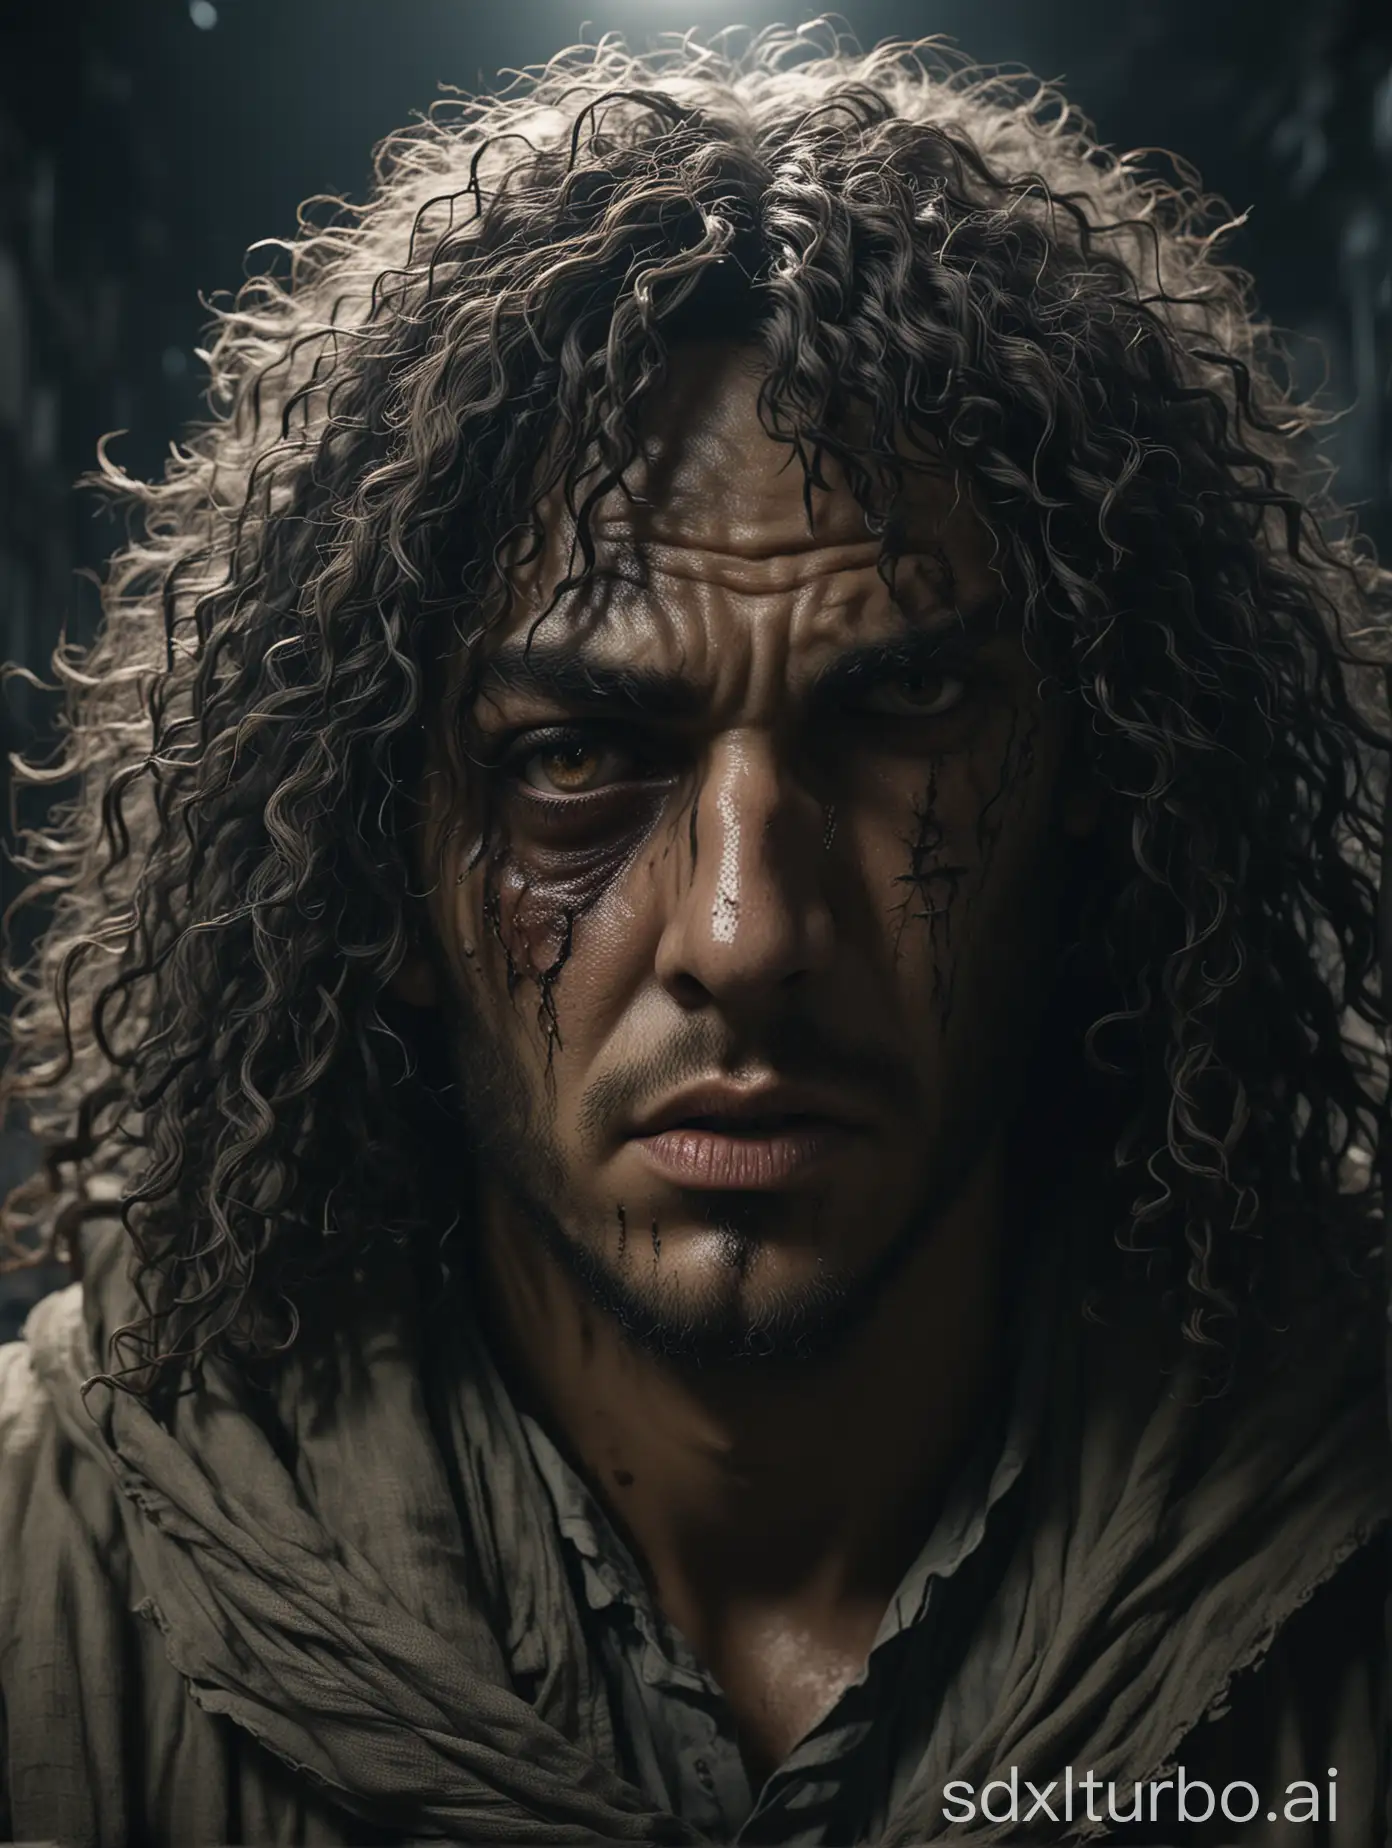 A depiction of Dajjal, featuring (one blind eye)++, curly hair, and a cruel, menacing face, amidst an apocalyptic, dystopian setting with creepy, horror lighting. Epic details, hyper detail, 8k, ultra sharp, UHD.